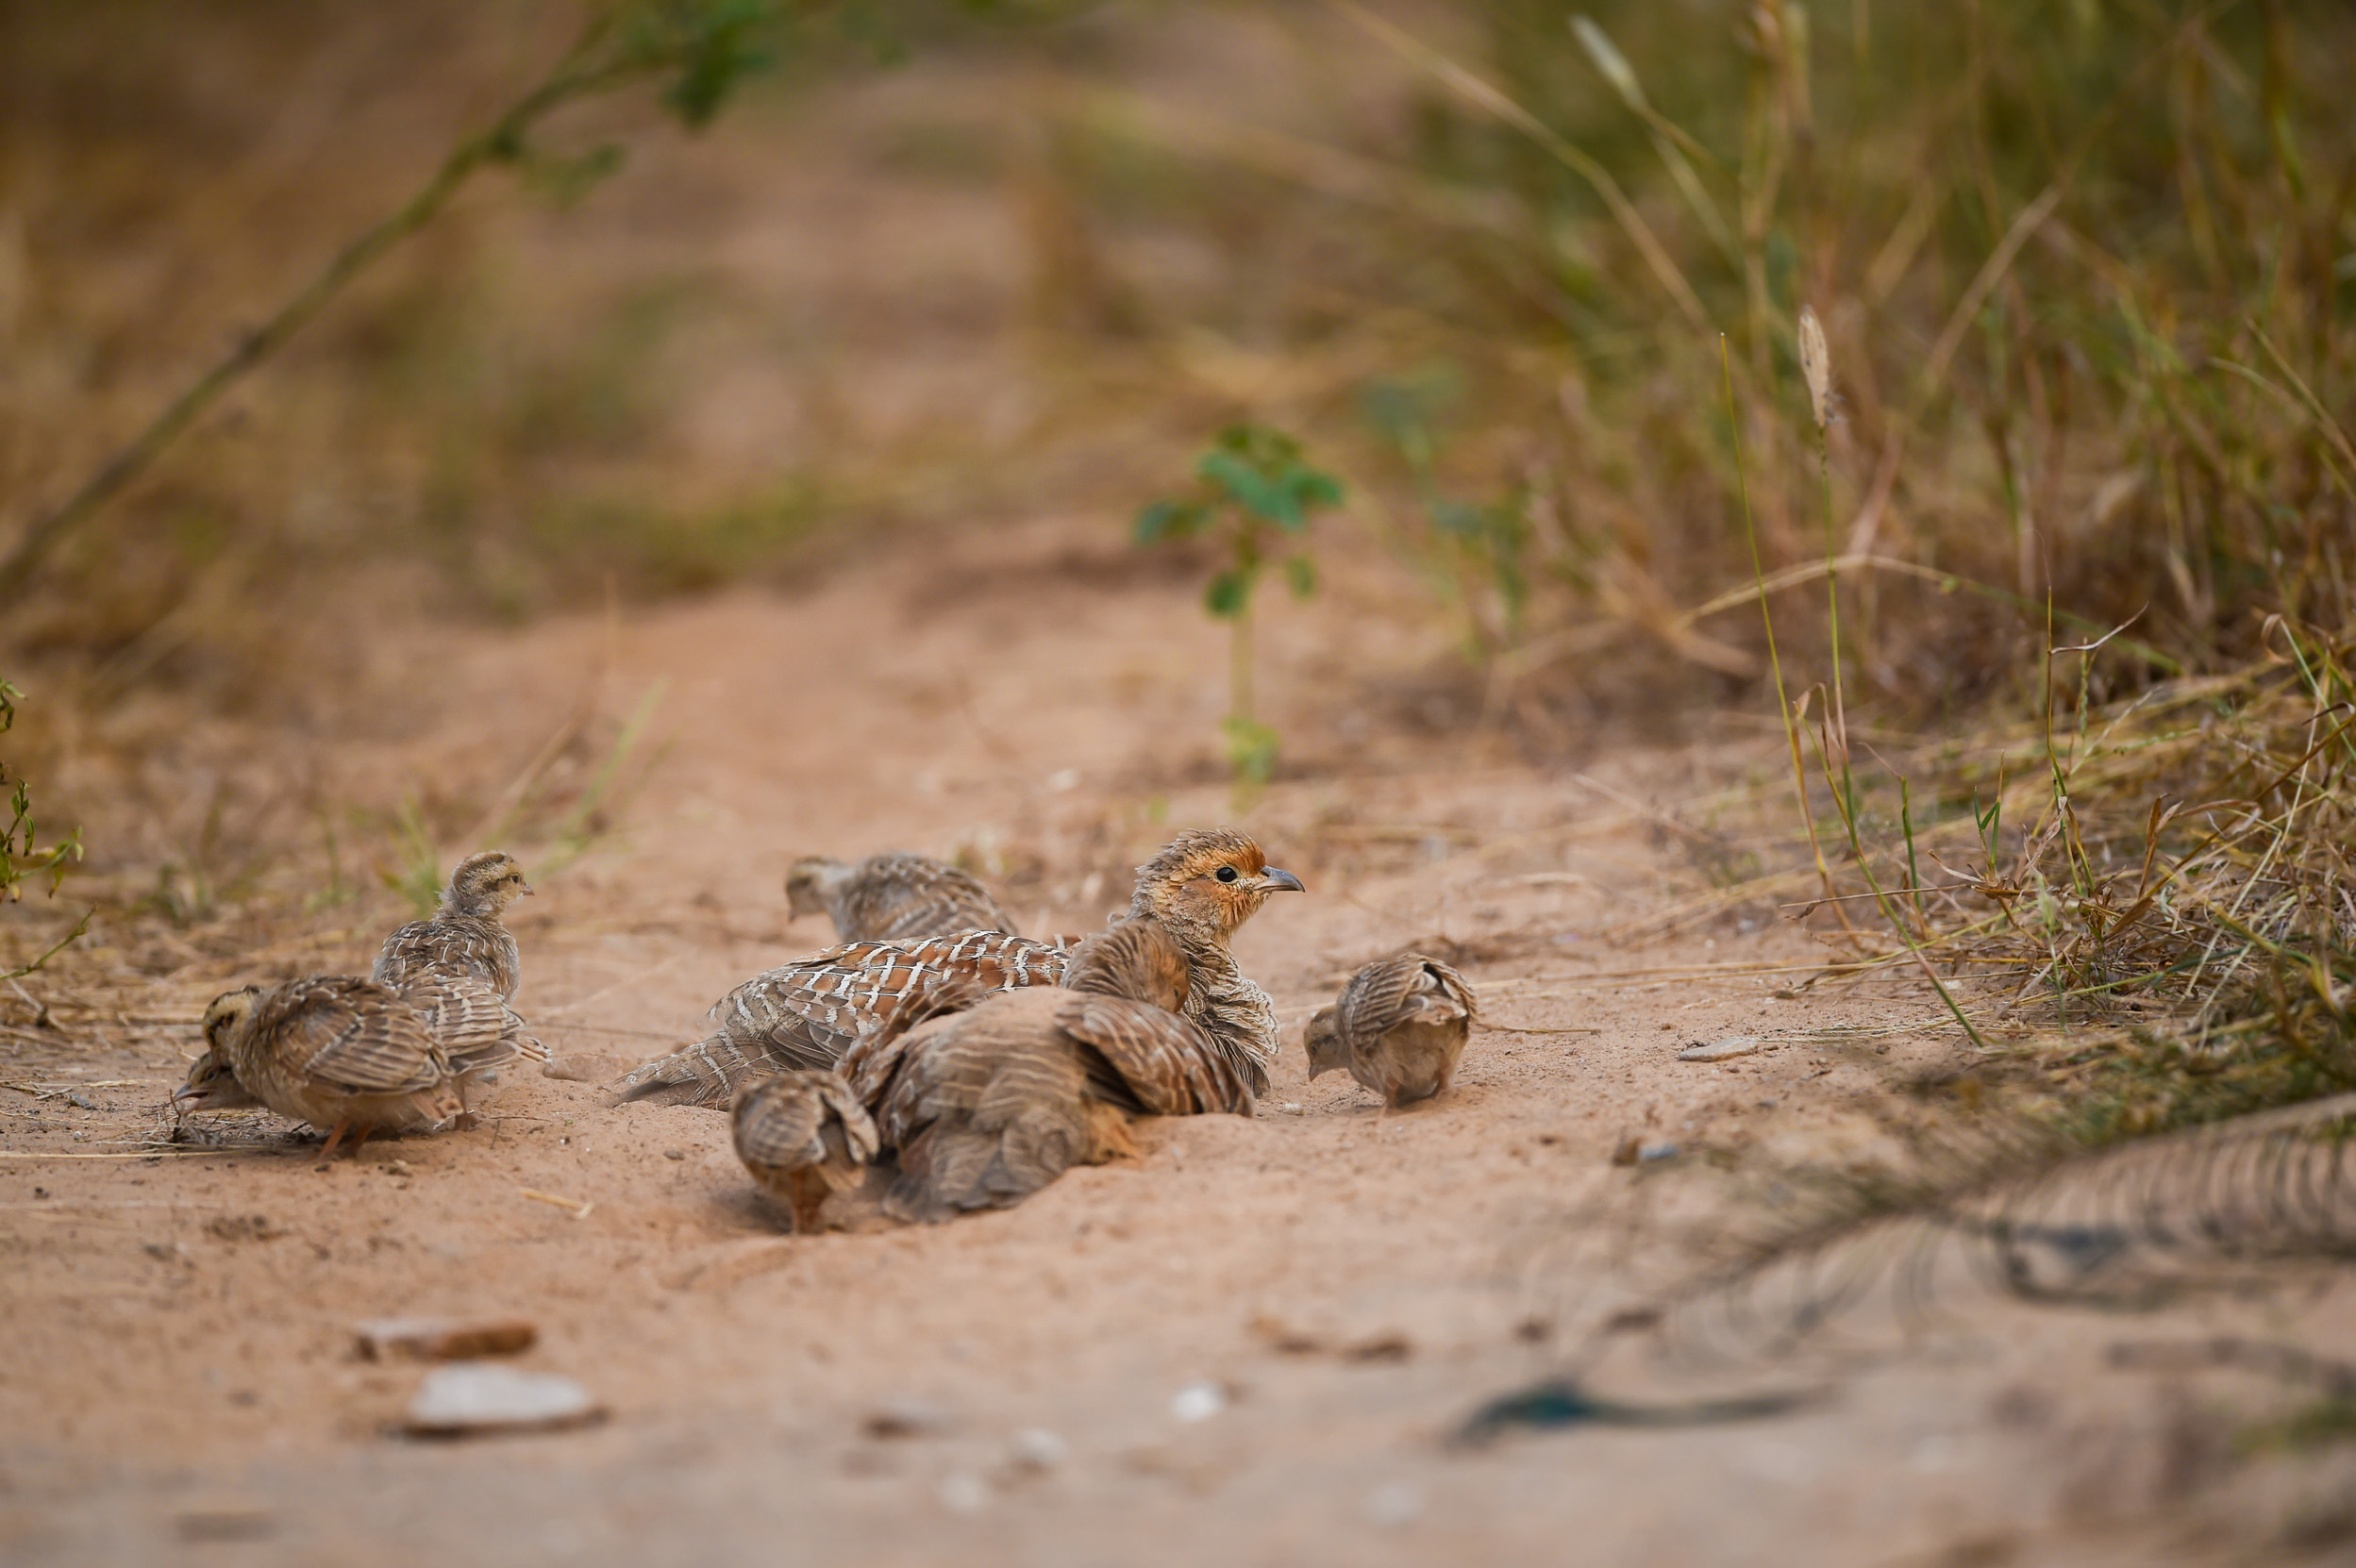 An adult Grey Partridge and their young laying in dirt between grassland.